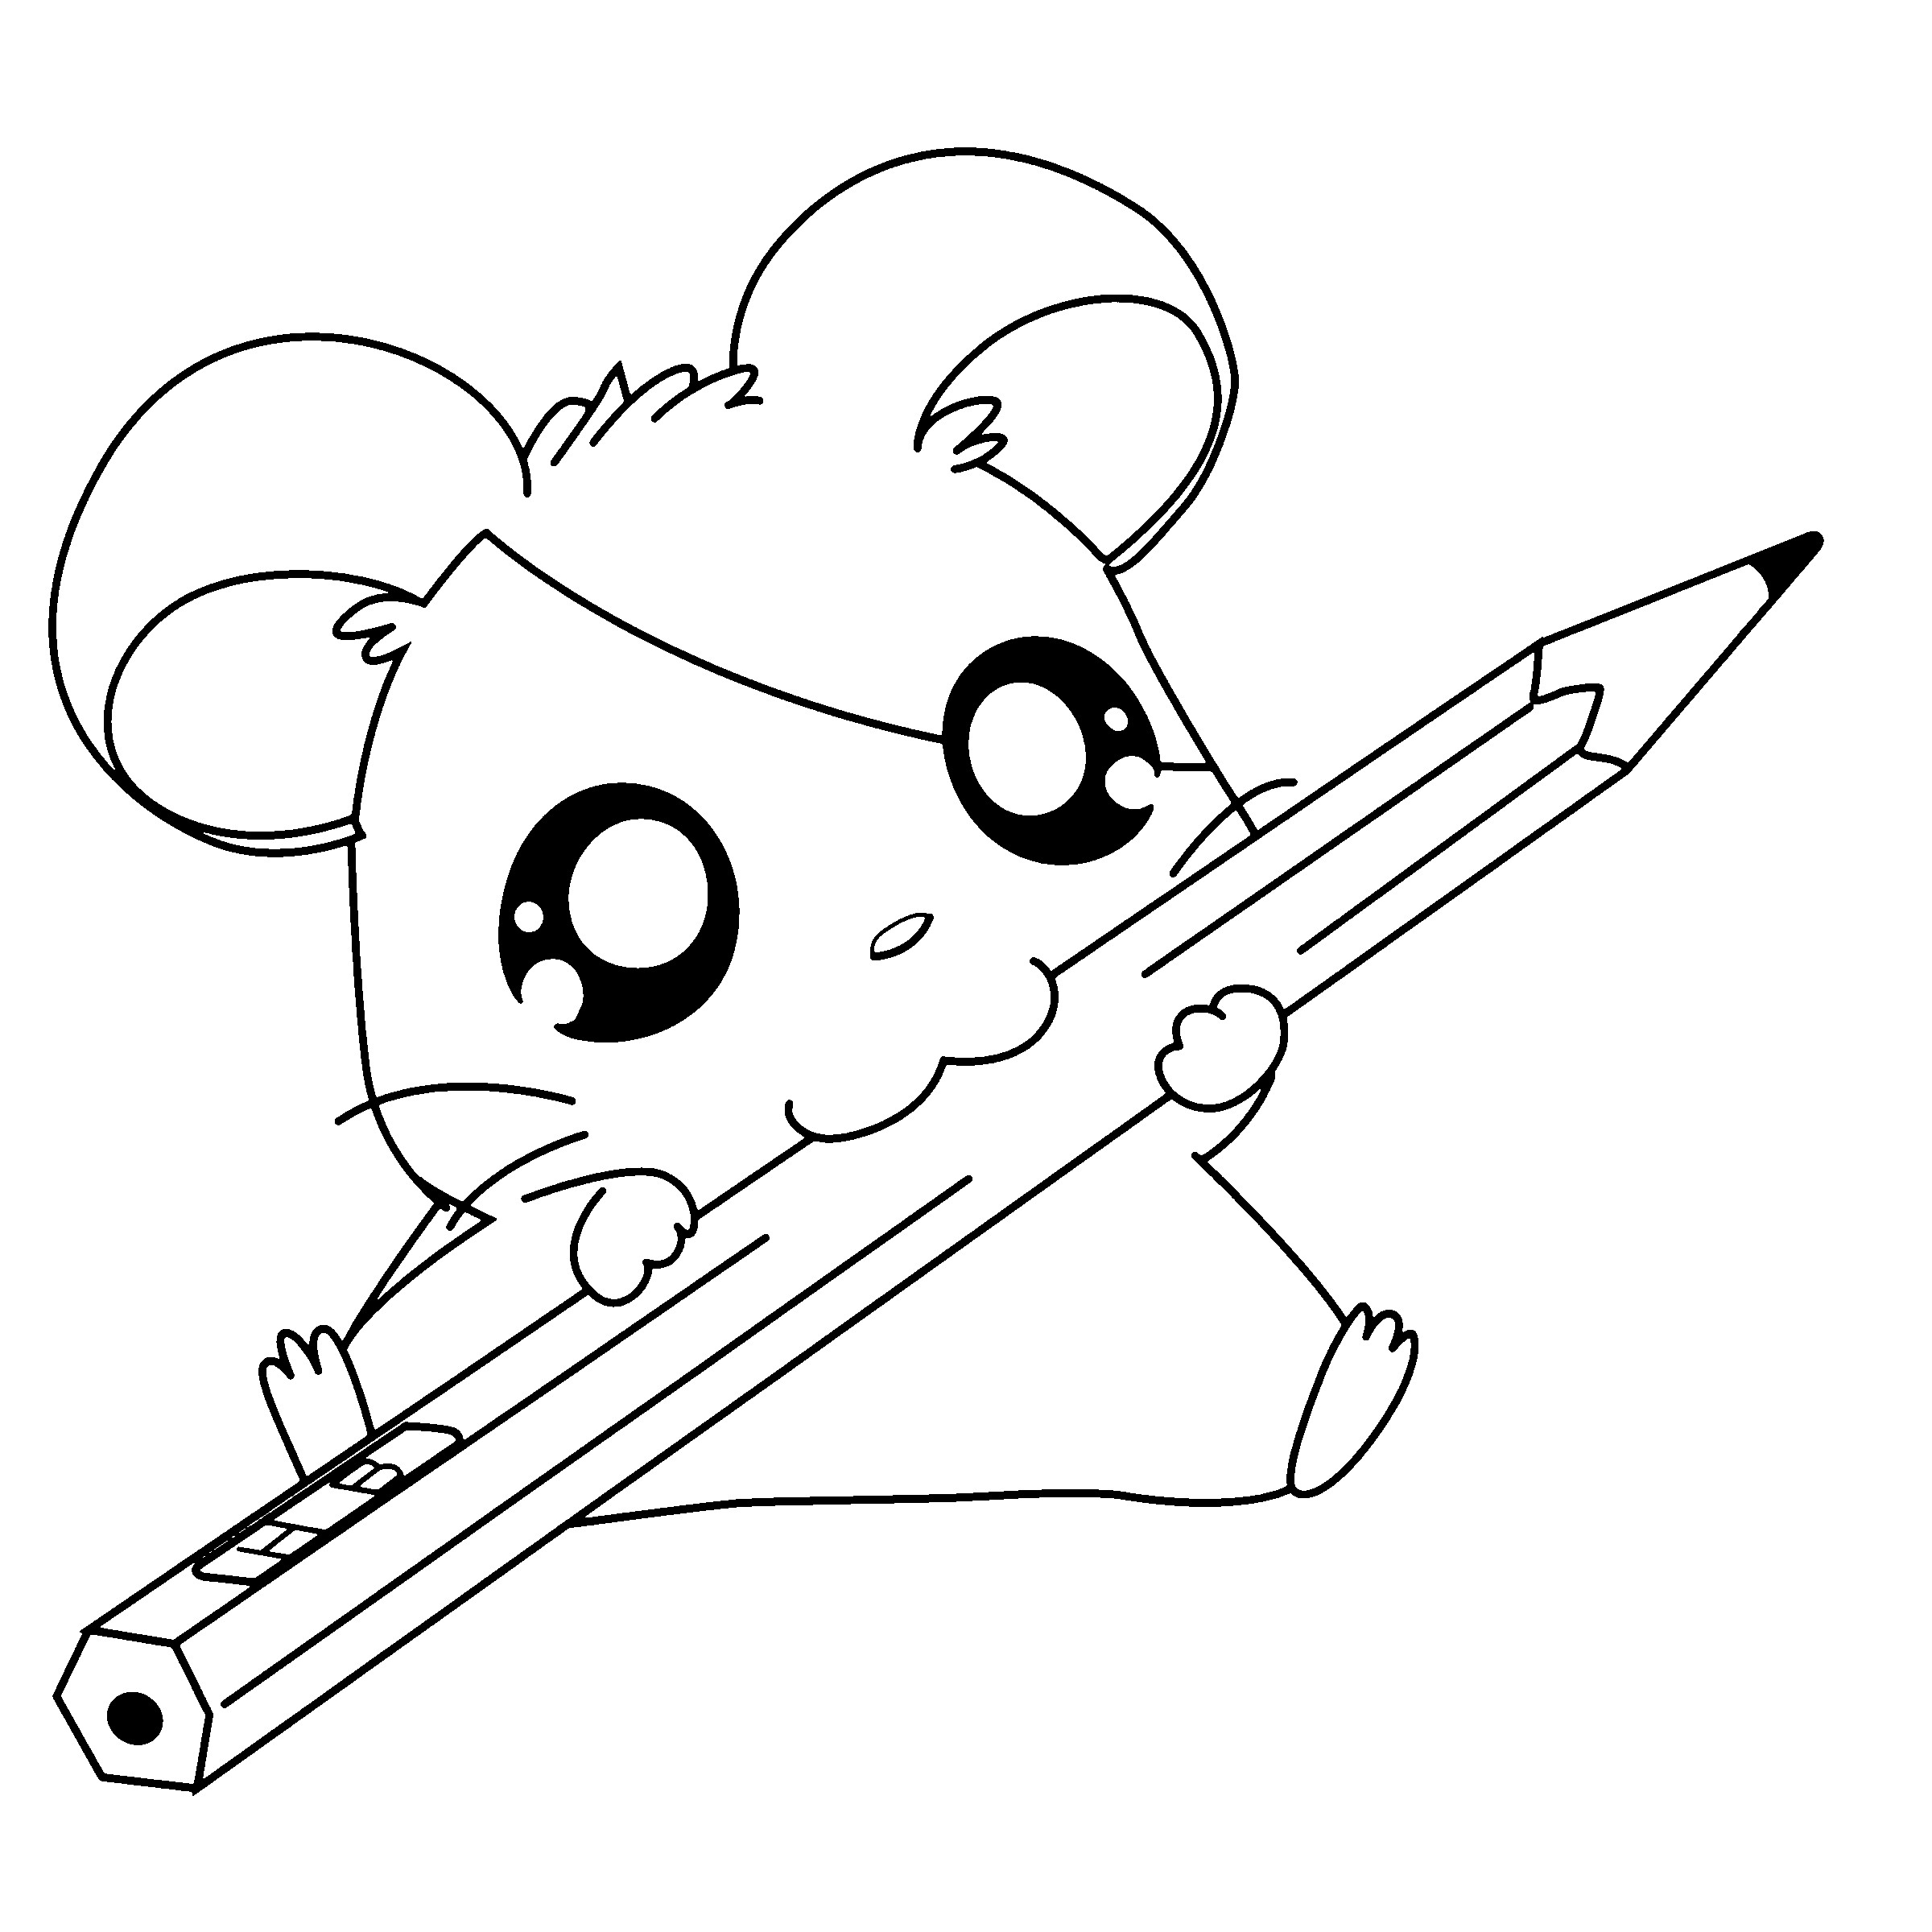 Cut Coloring Pages
 cute coloring pages